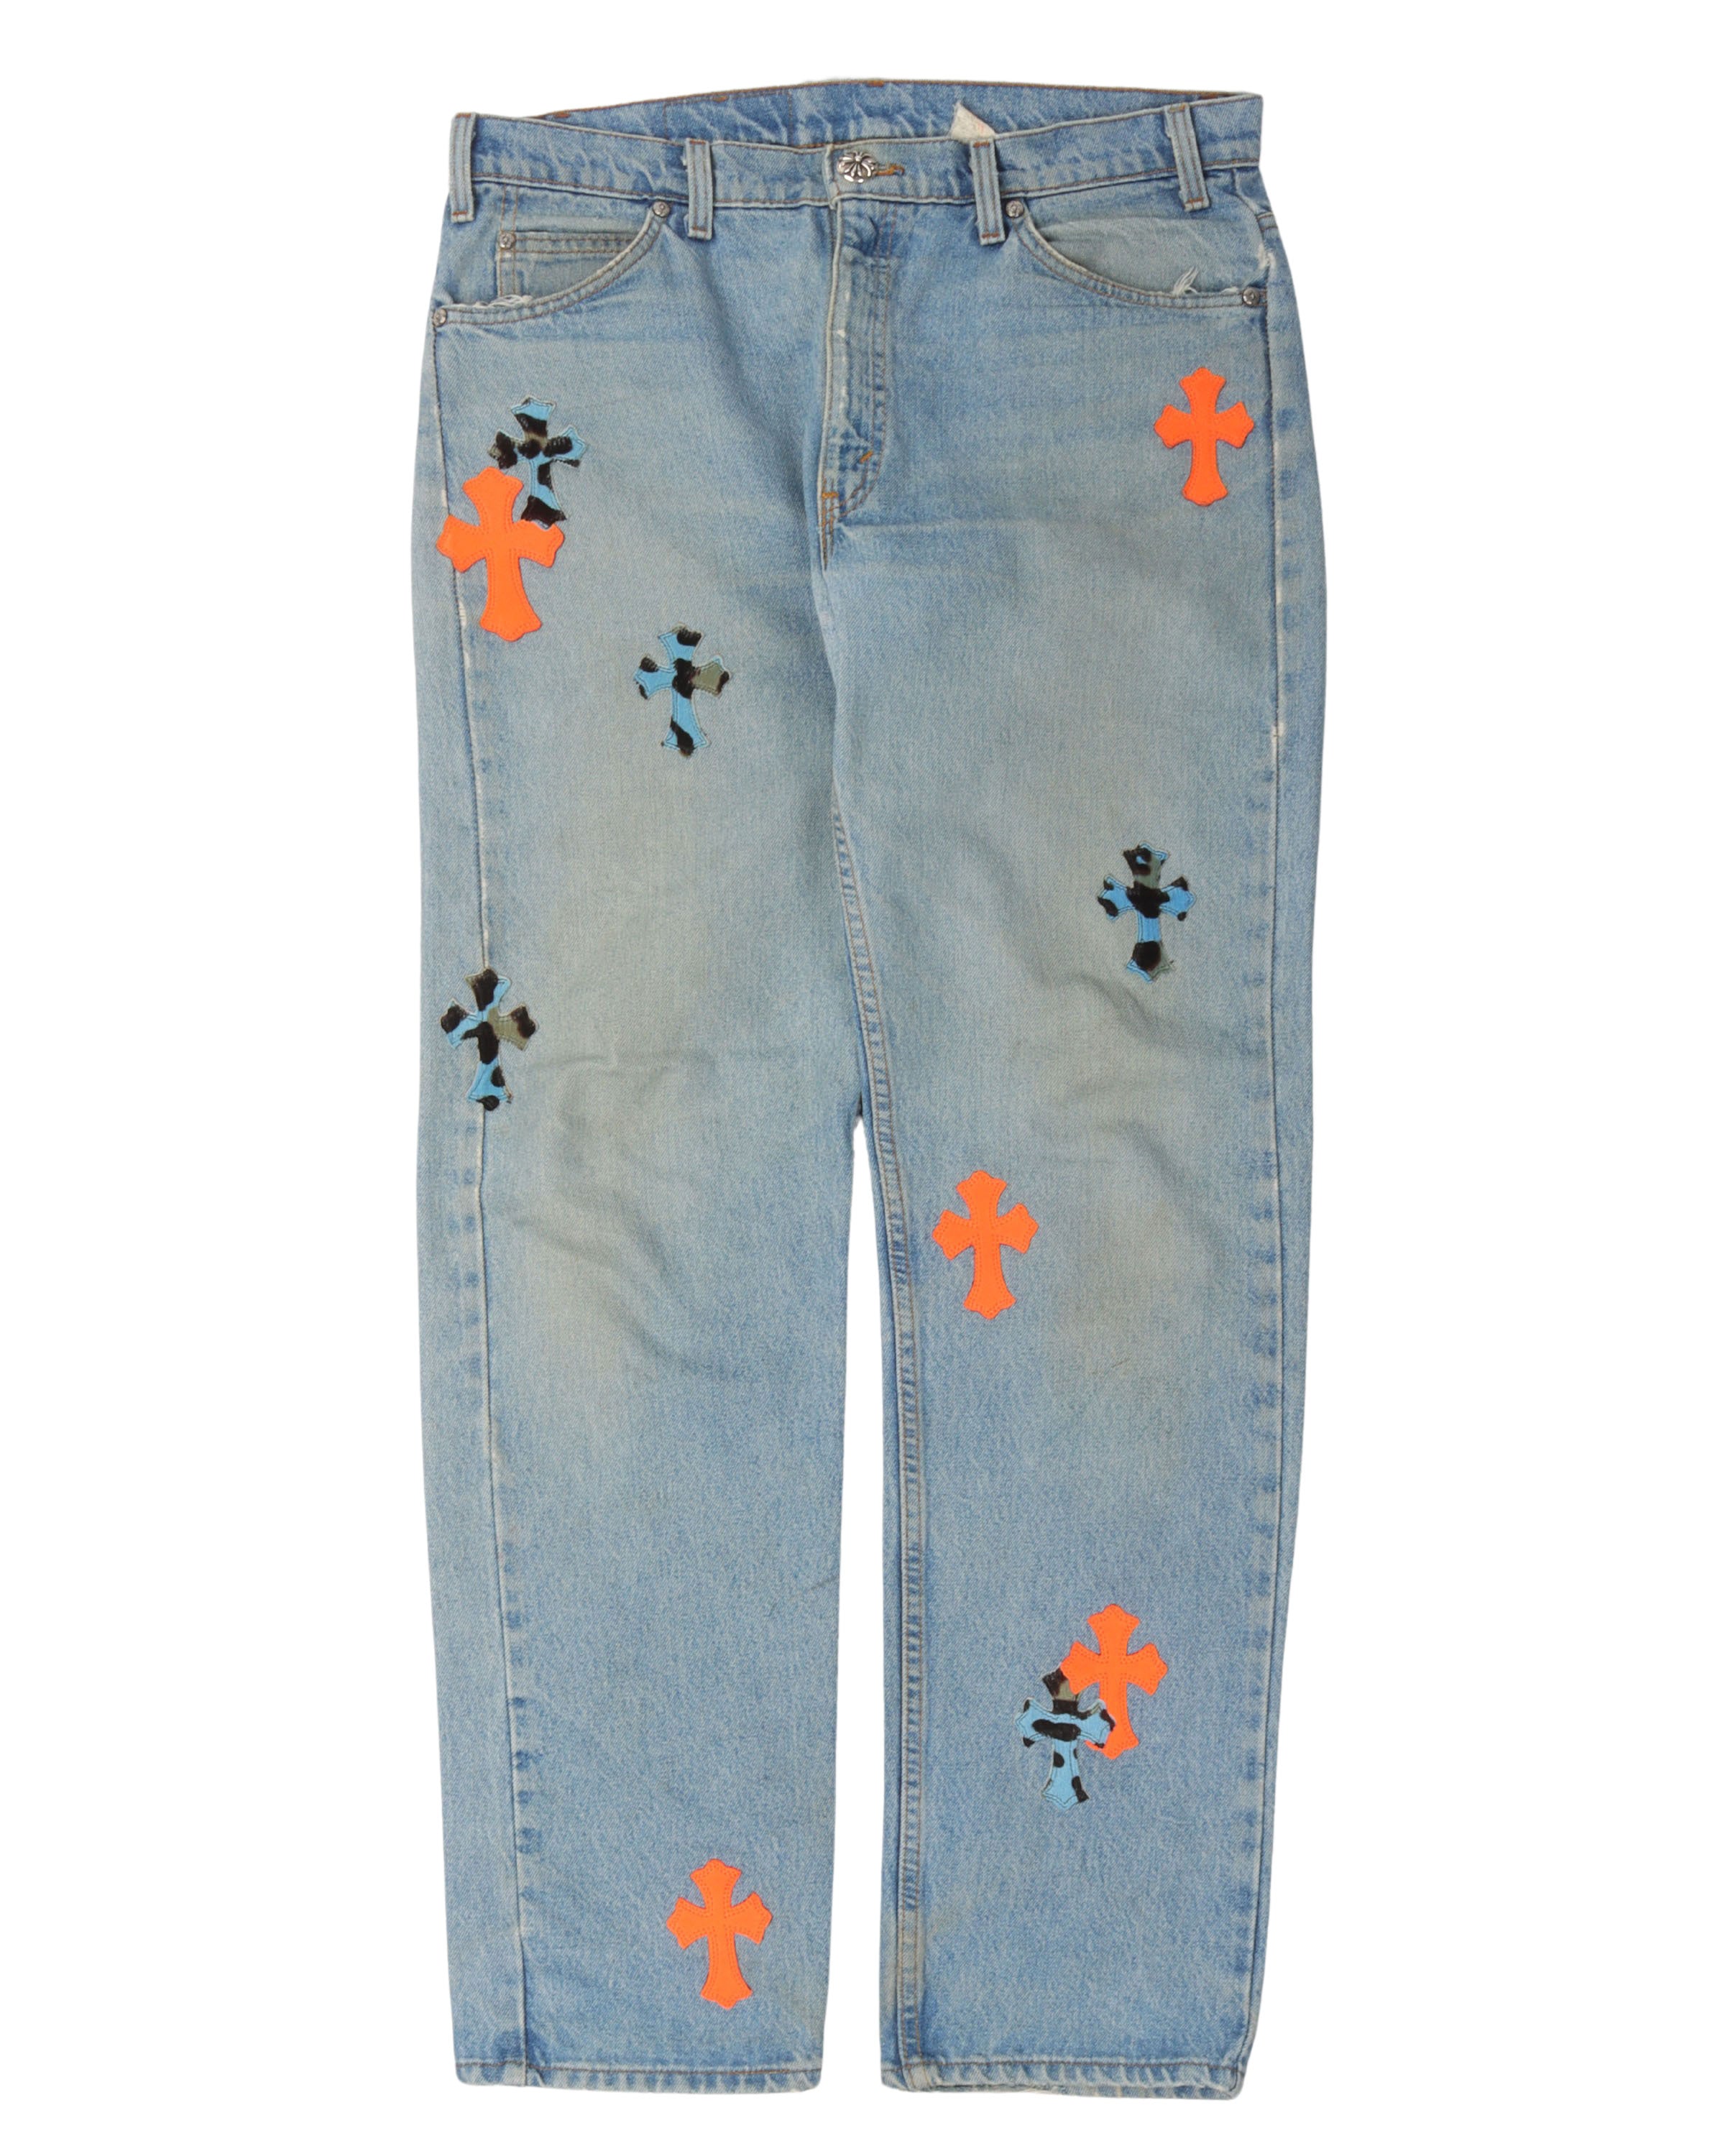 Levi's St. Barth's Cross Patch Jeans